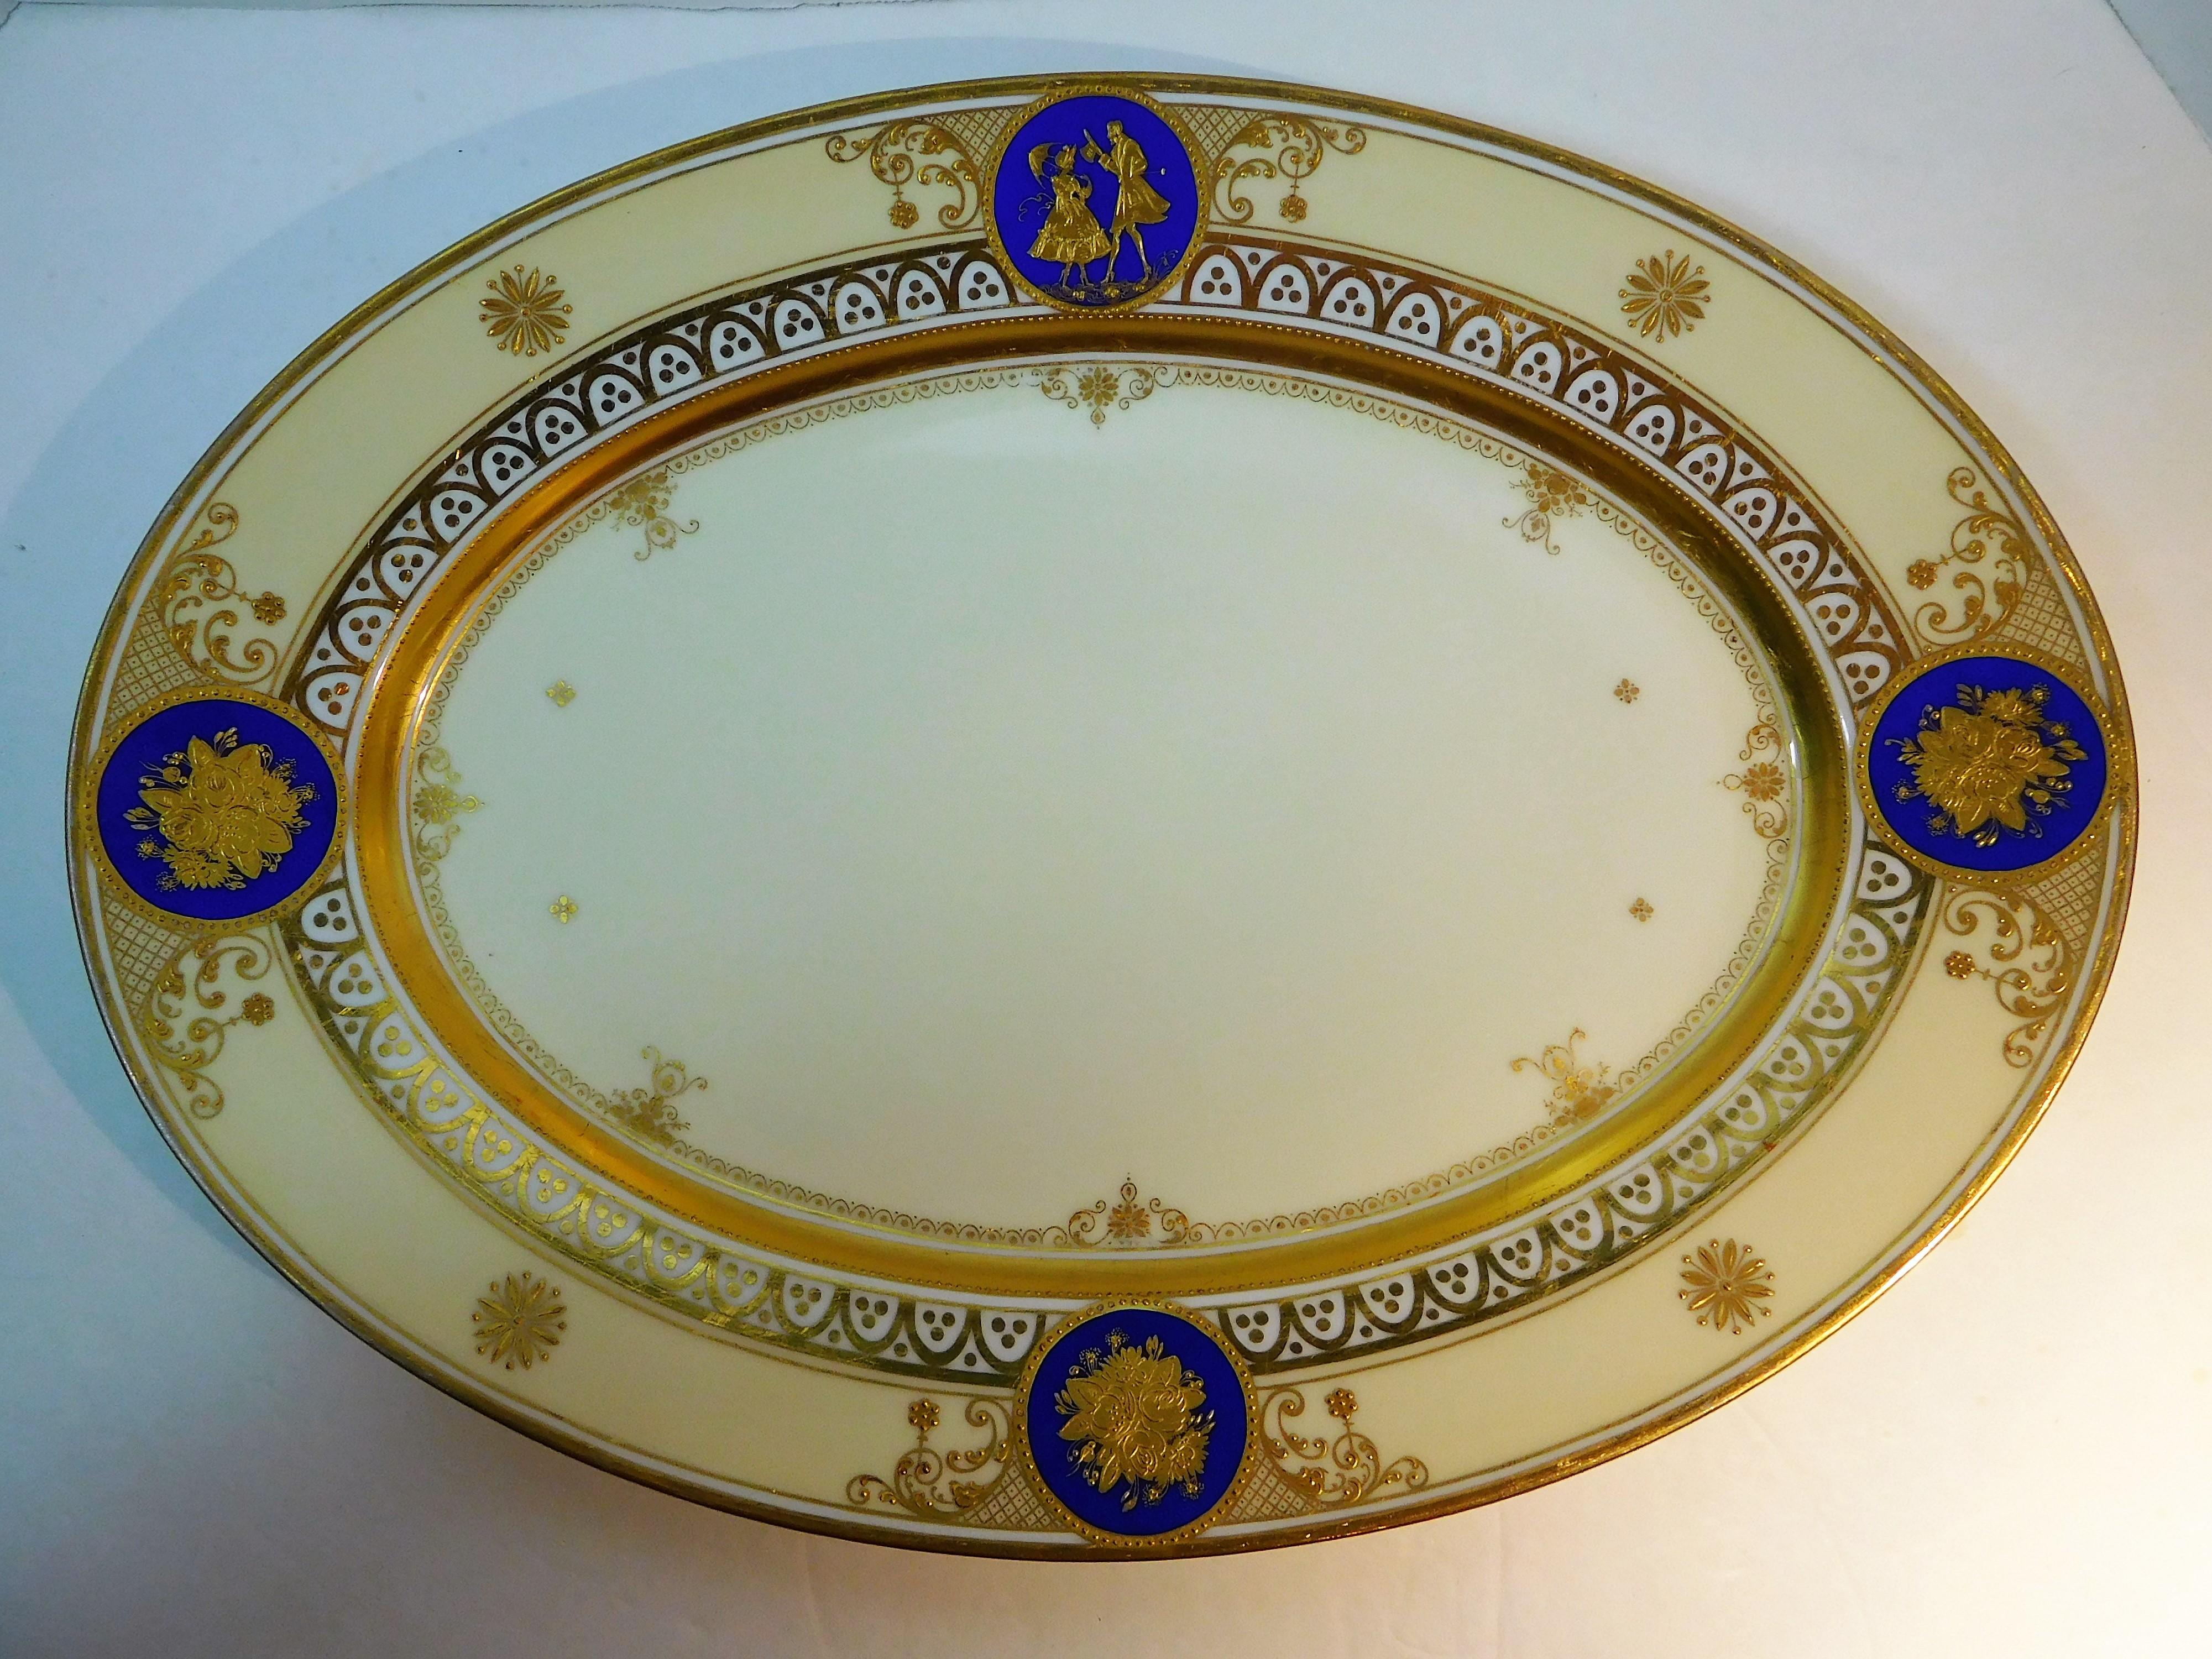 This German fine porcelain large oval platter is from the Dresden atelier of Ambrosius Lamm (active 1887-1934), and was hand painted in enamels and hand-burnished with double-gold incrustation in his studio. It is signed on the bottom with his logo,